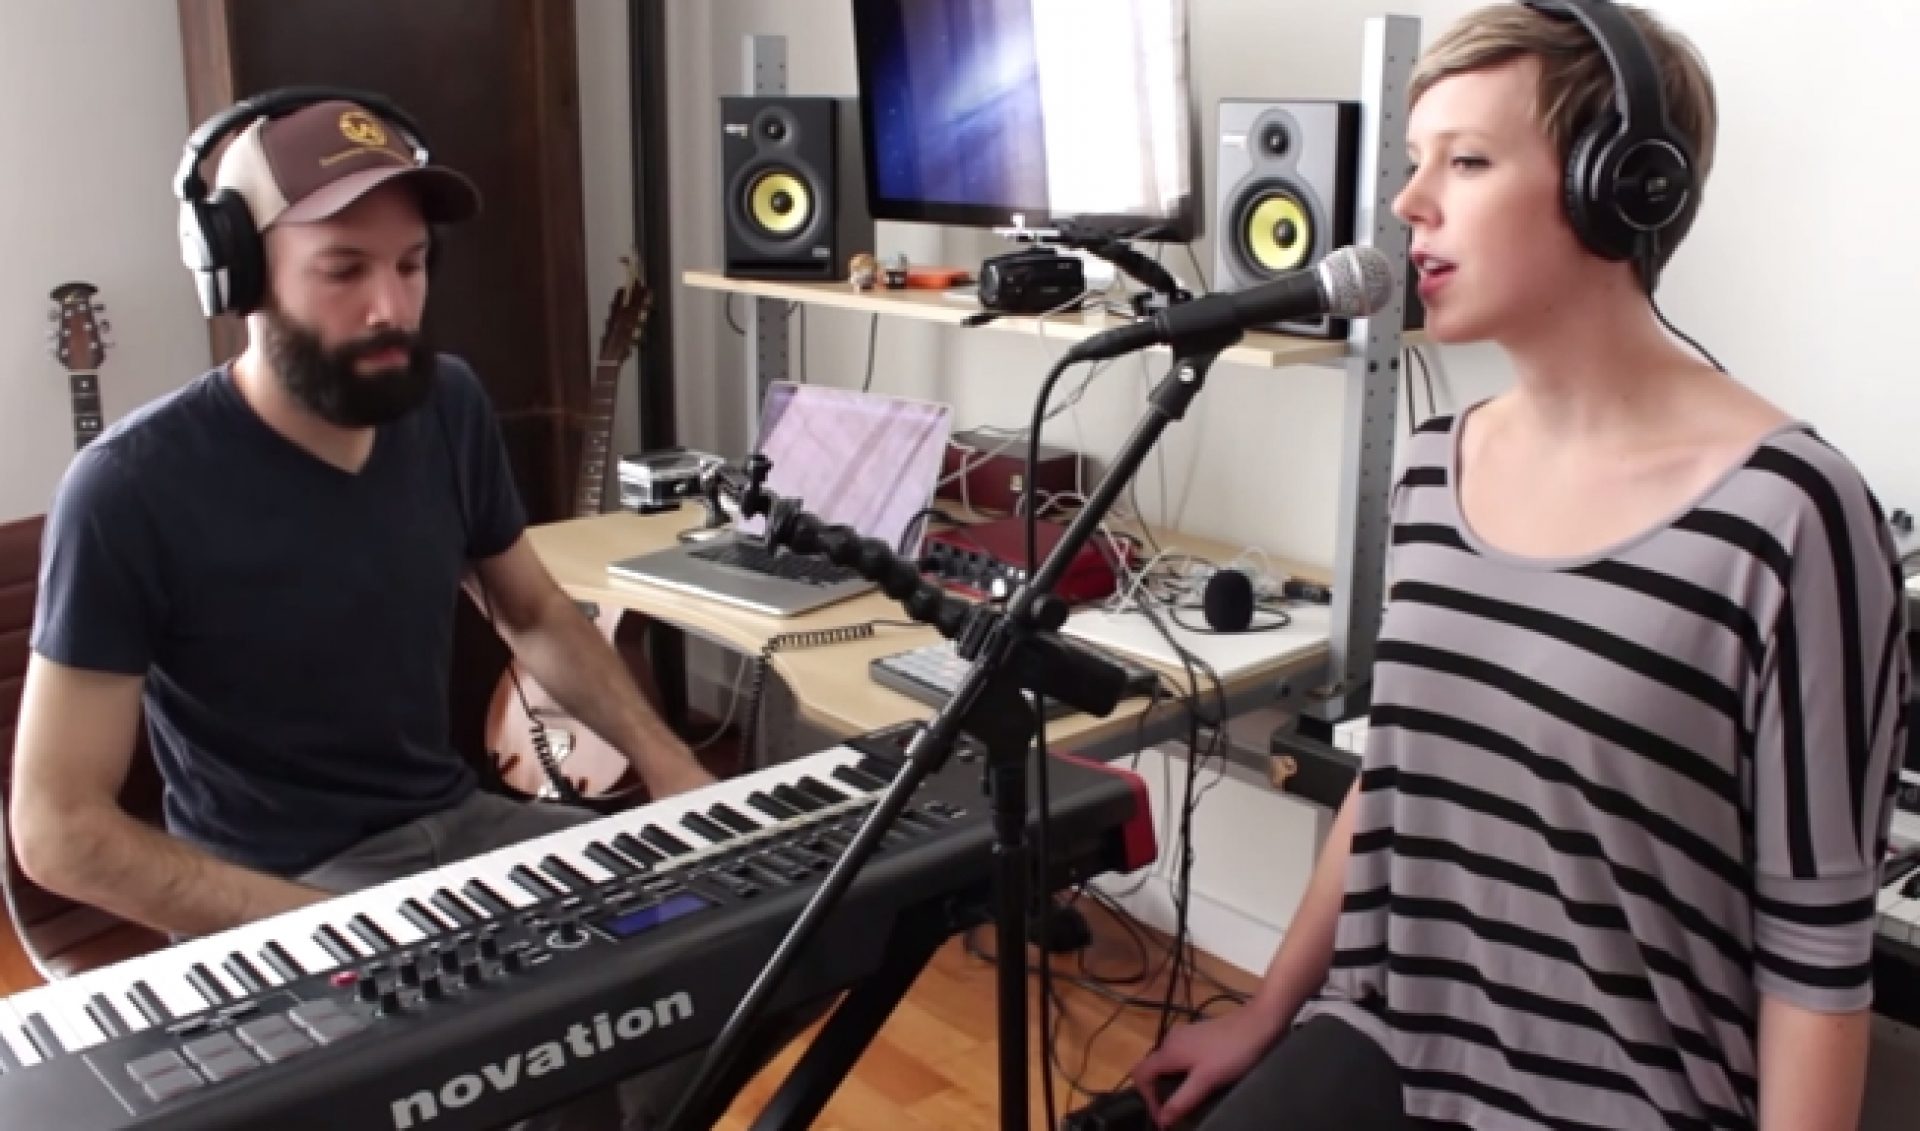 Jack Conte Breaks Down Six-Figure Expenses For 28-Day Pomplamoose Tour